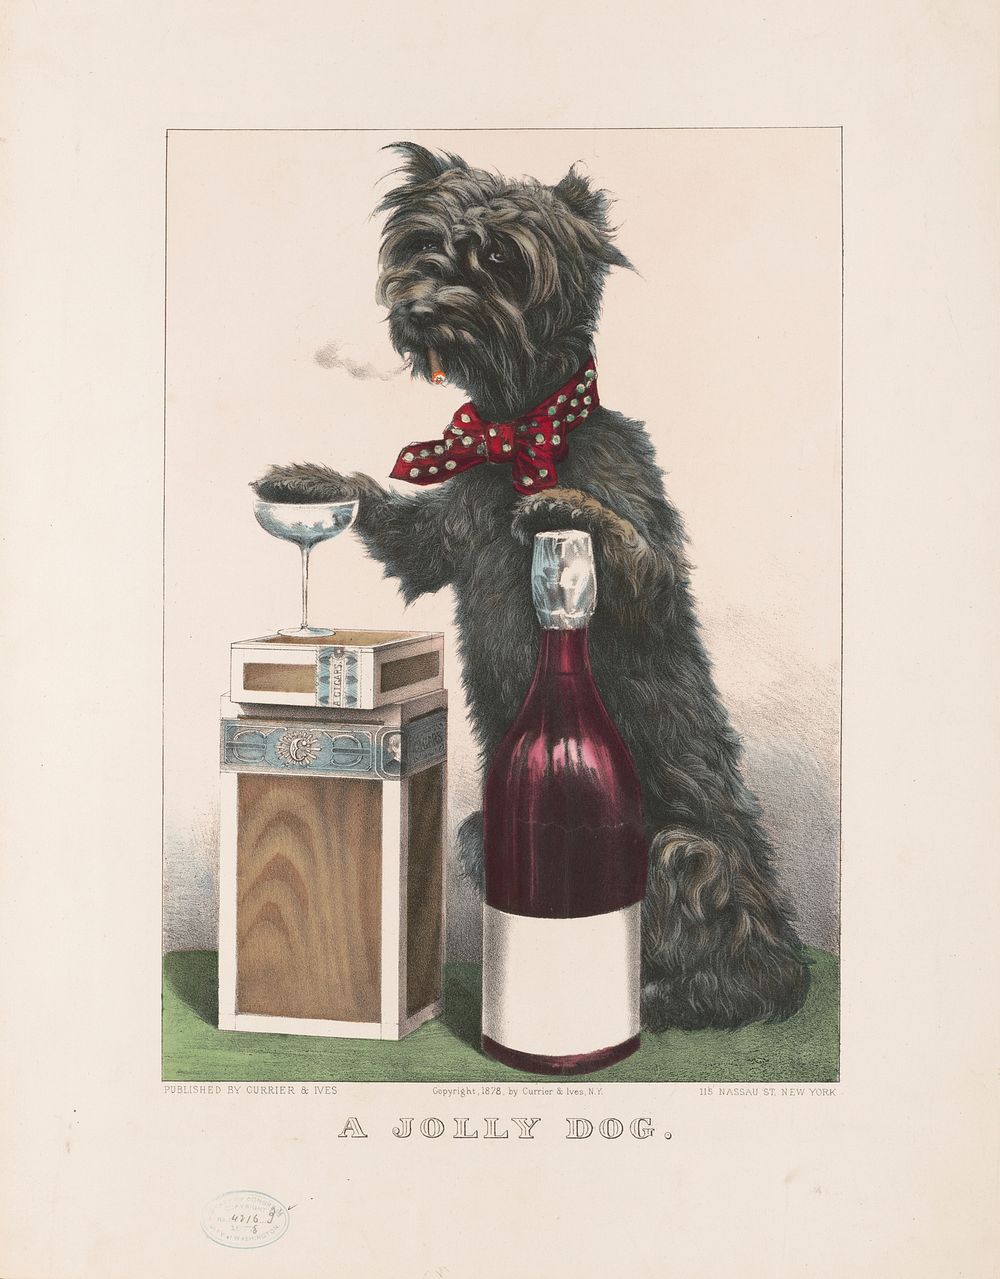 A jolly dog, Currier & Ives.